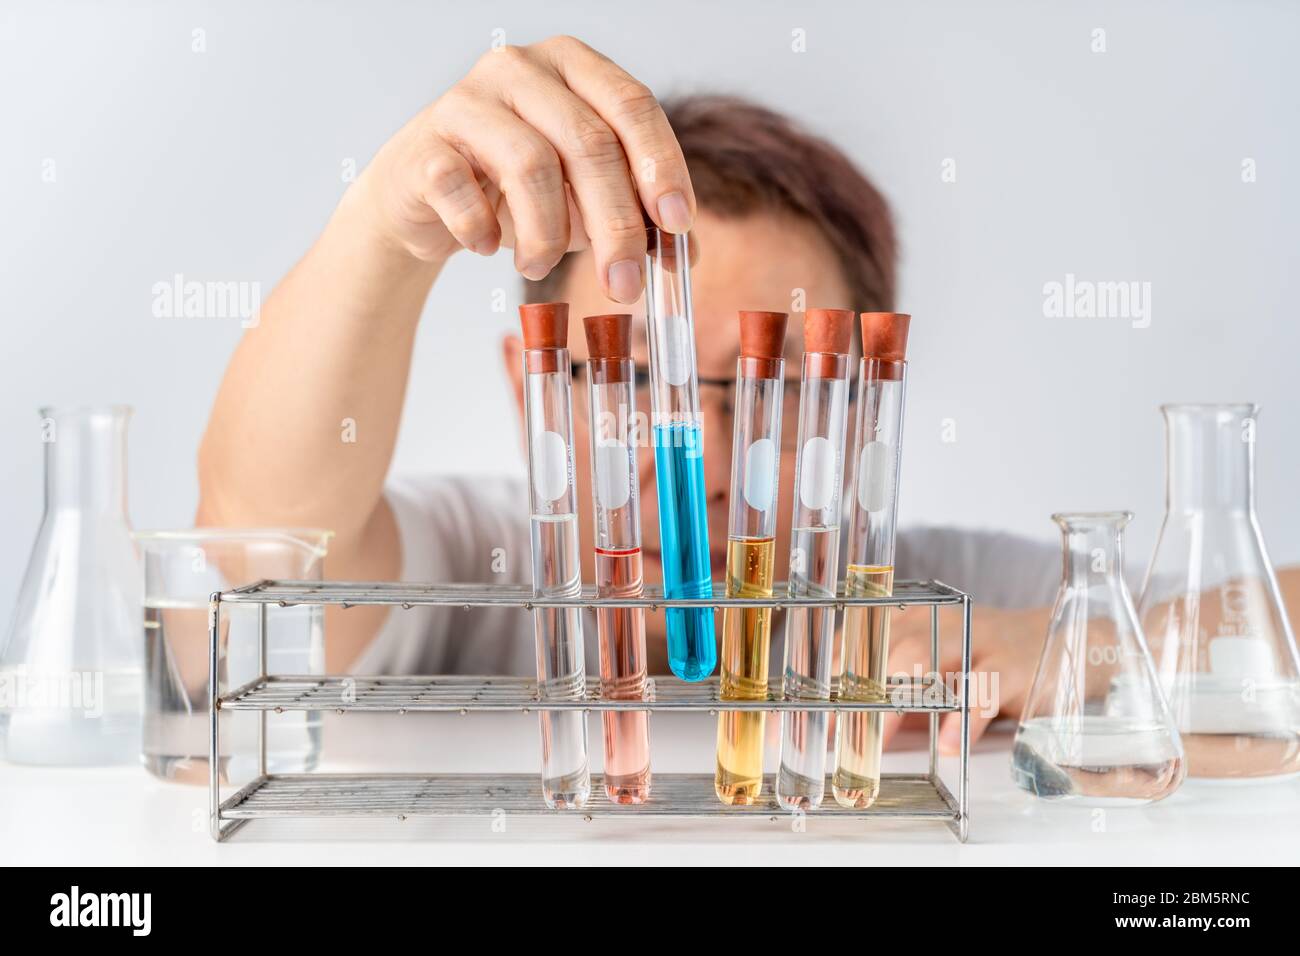 A man lifting up test tube with blue liquid from the rack, education or science experimental concept Stock Photo